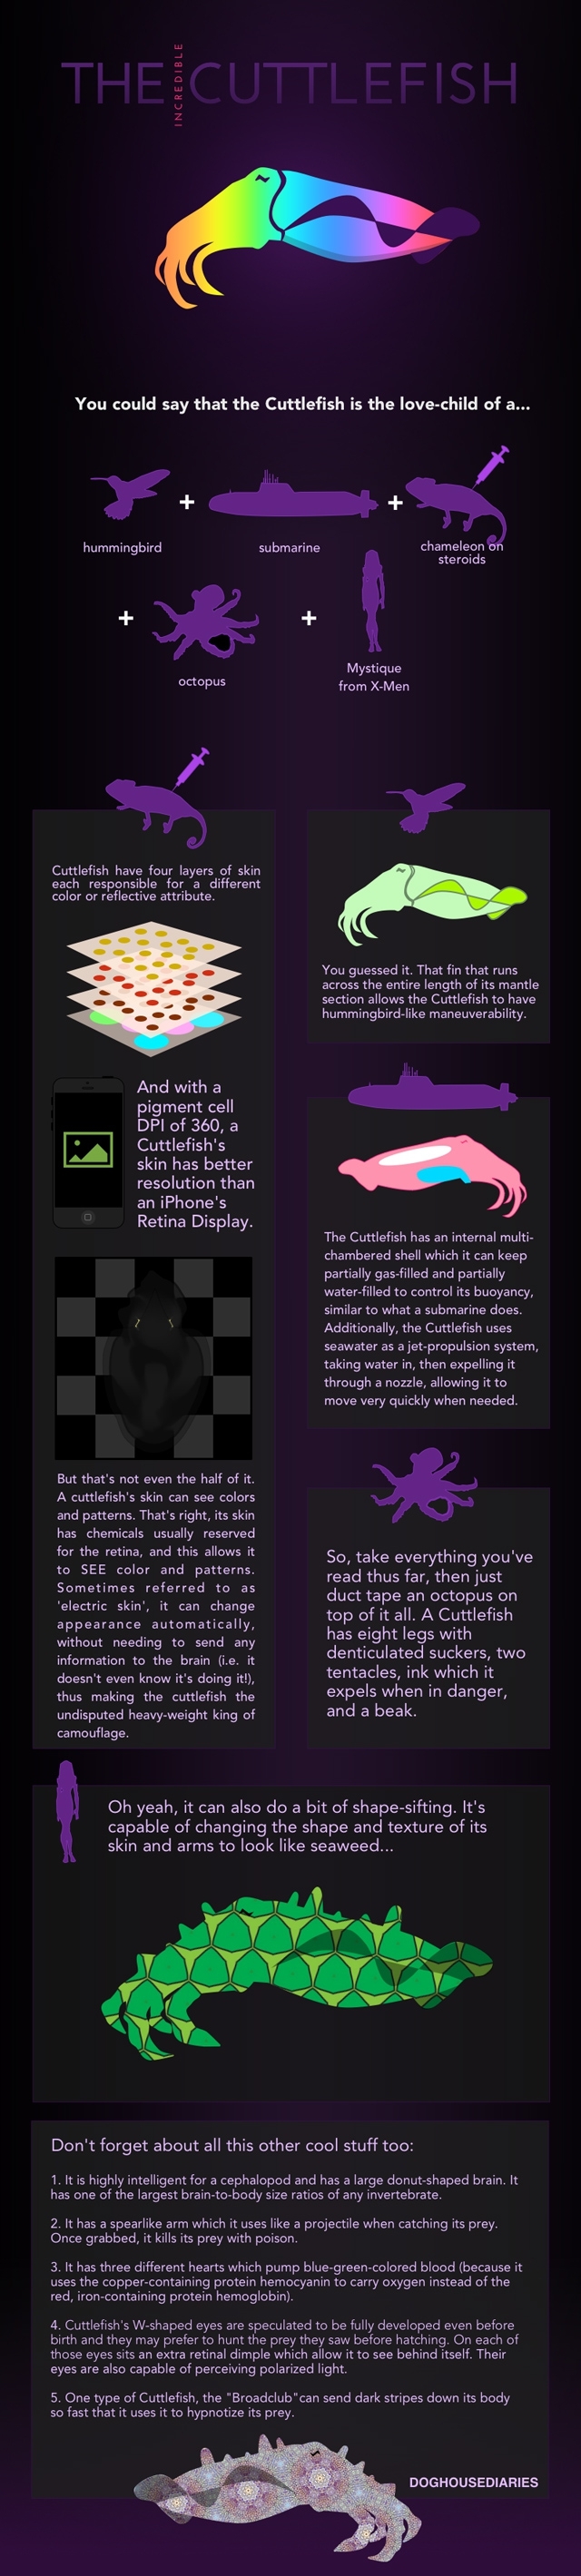 The Incredible Cuttlefish, An Infographic by Doghouse Diaries